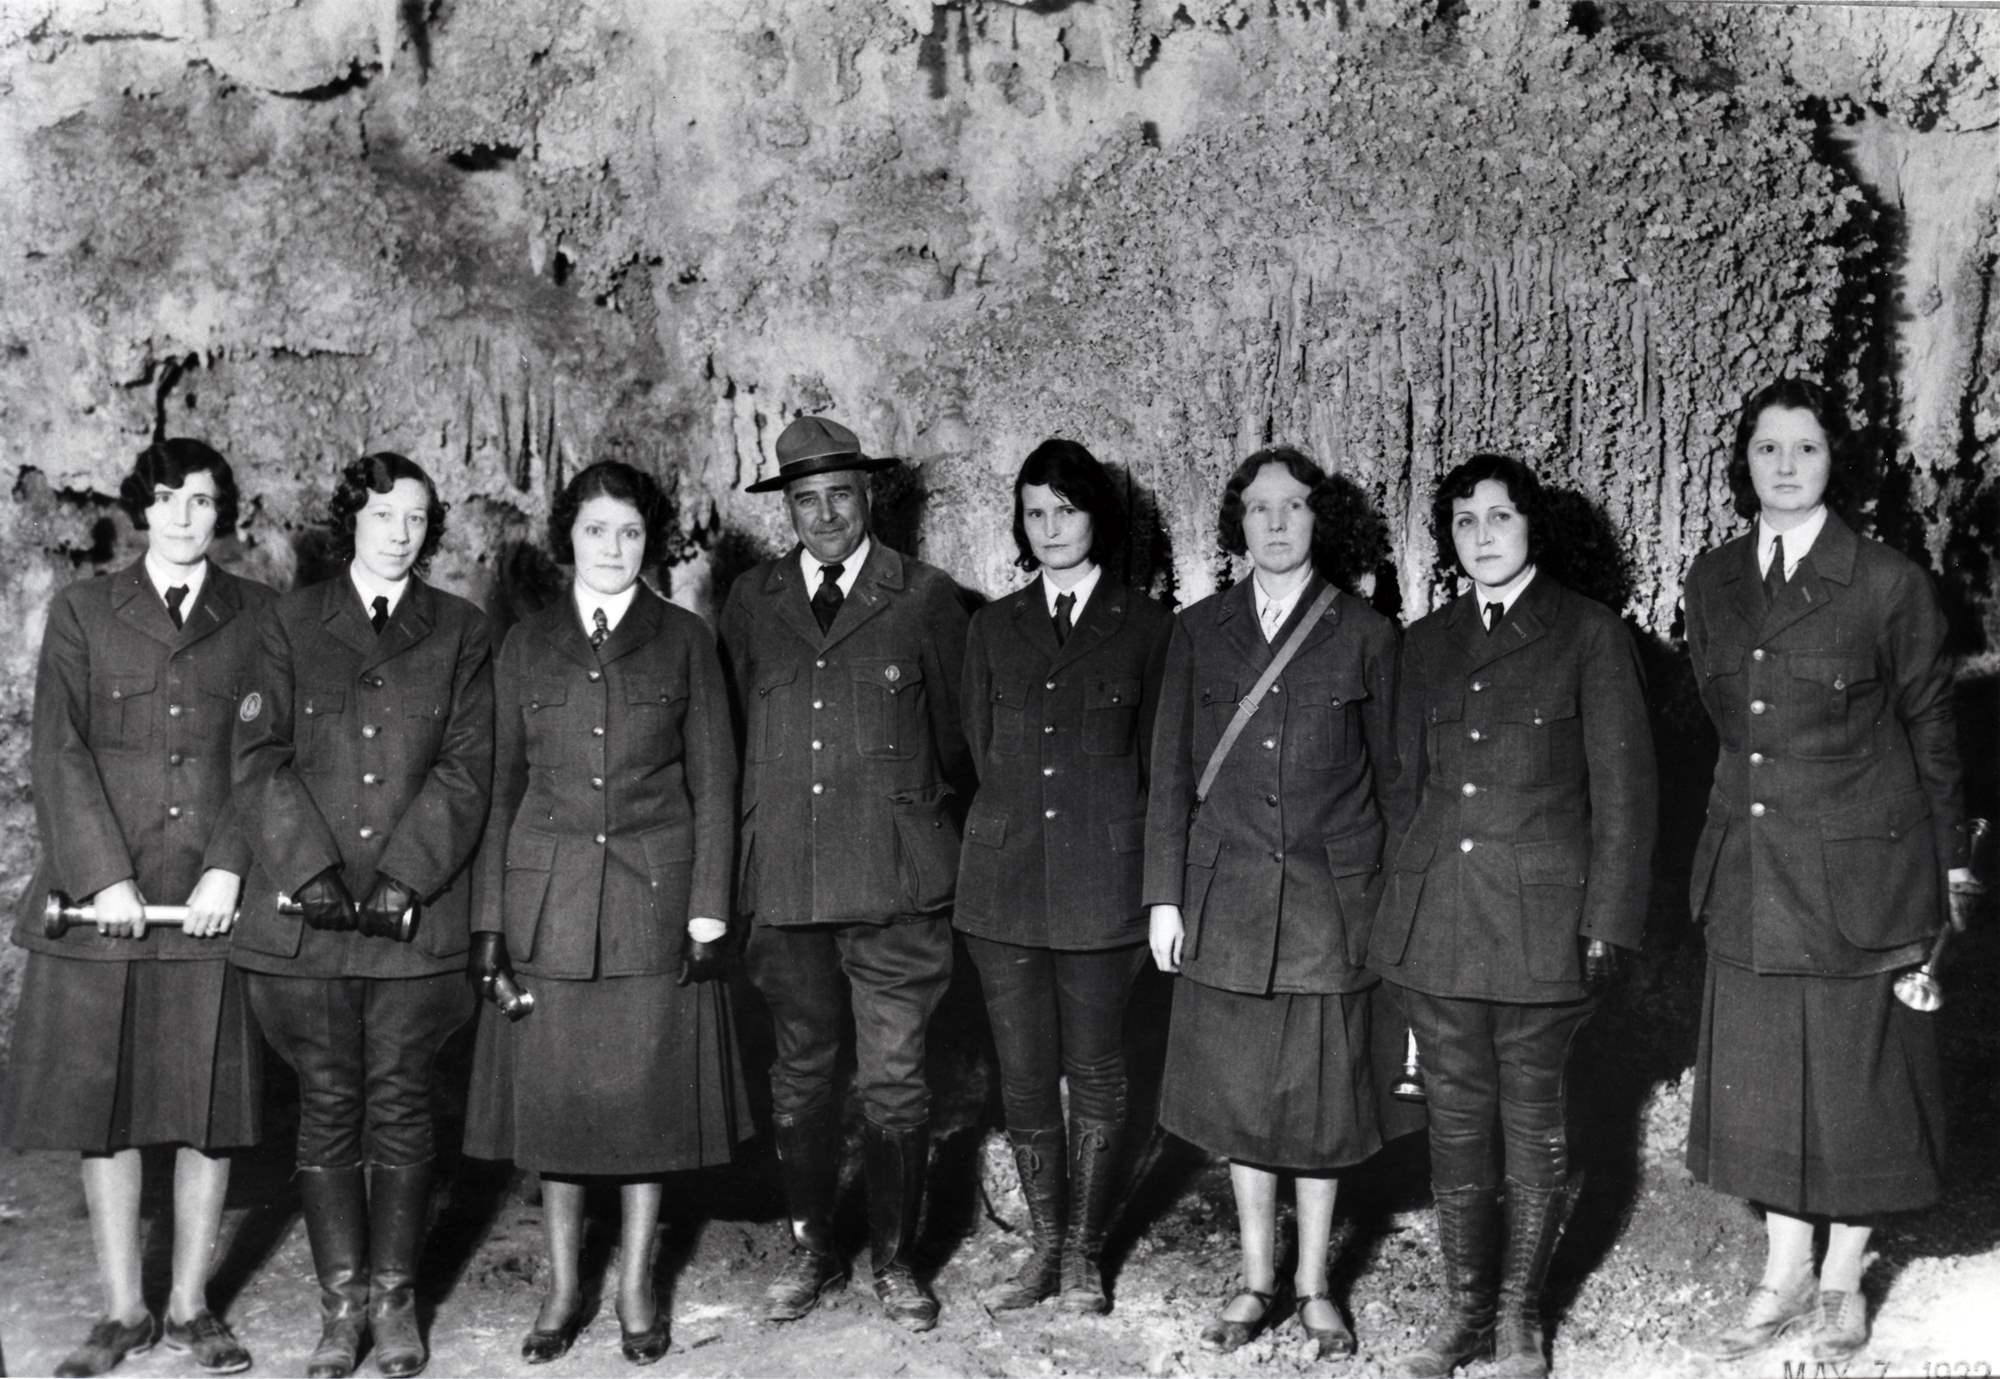 Seven women pose with Thomas Boles inside a cave. They all wear NPS uniforms. Only Boles wears a broad brim hat and a round superintendent’s badge.